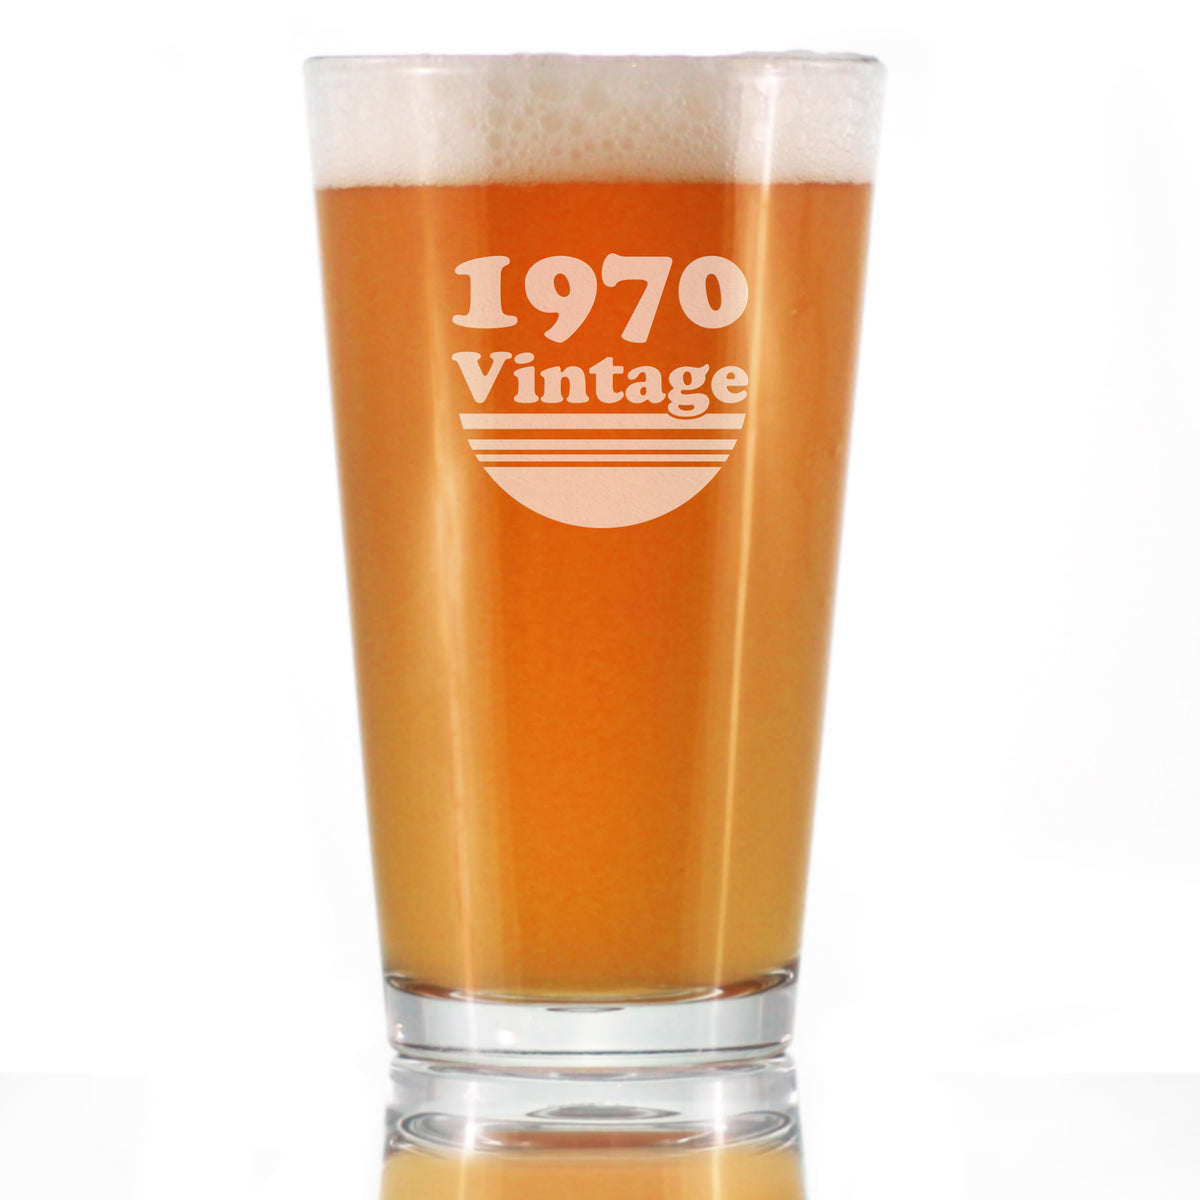 Vintage 1970 - Pint Glass for Beer - 54th Birthday Gifts for Men or Women Turning 54 - Fun Bday Party Decor - 16 oz